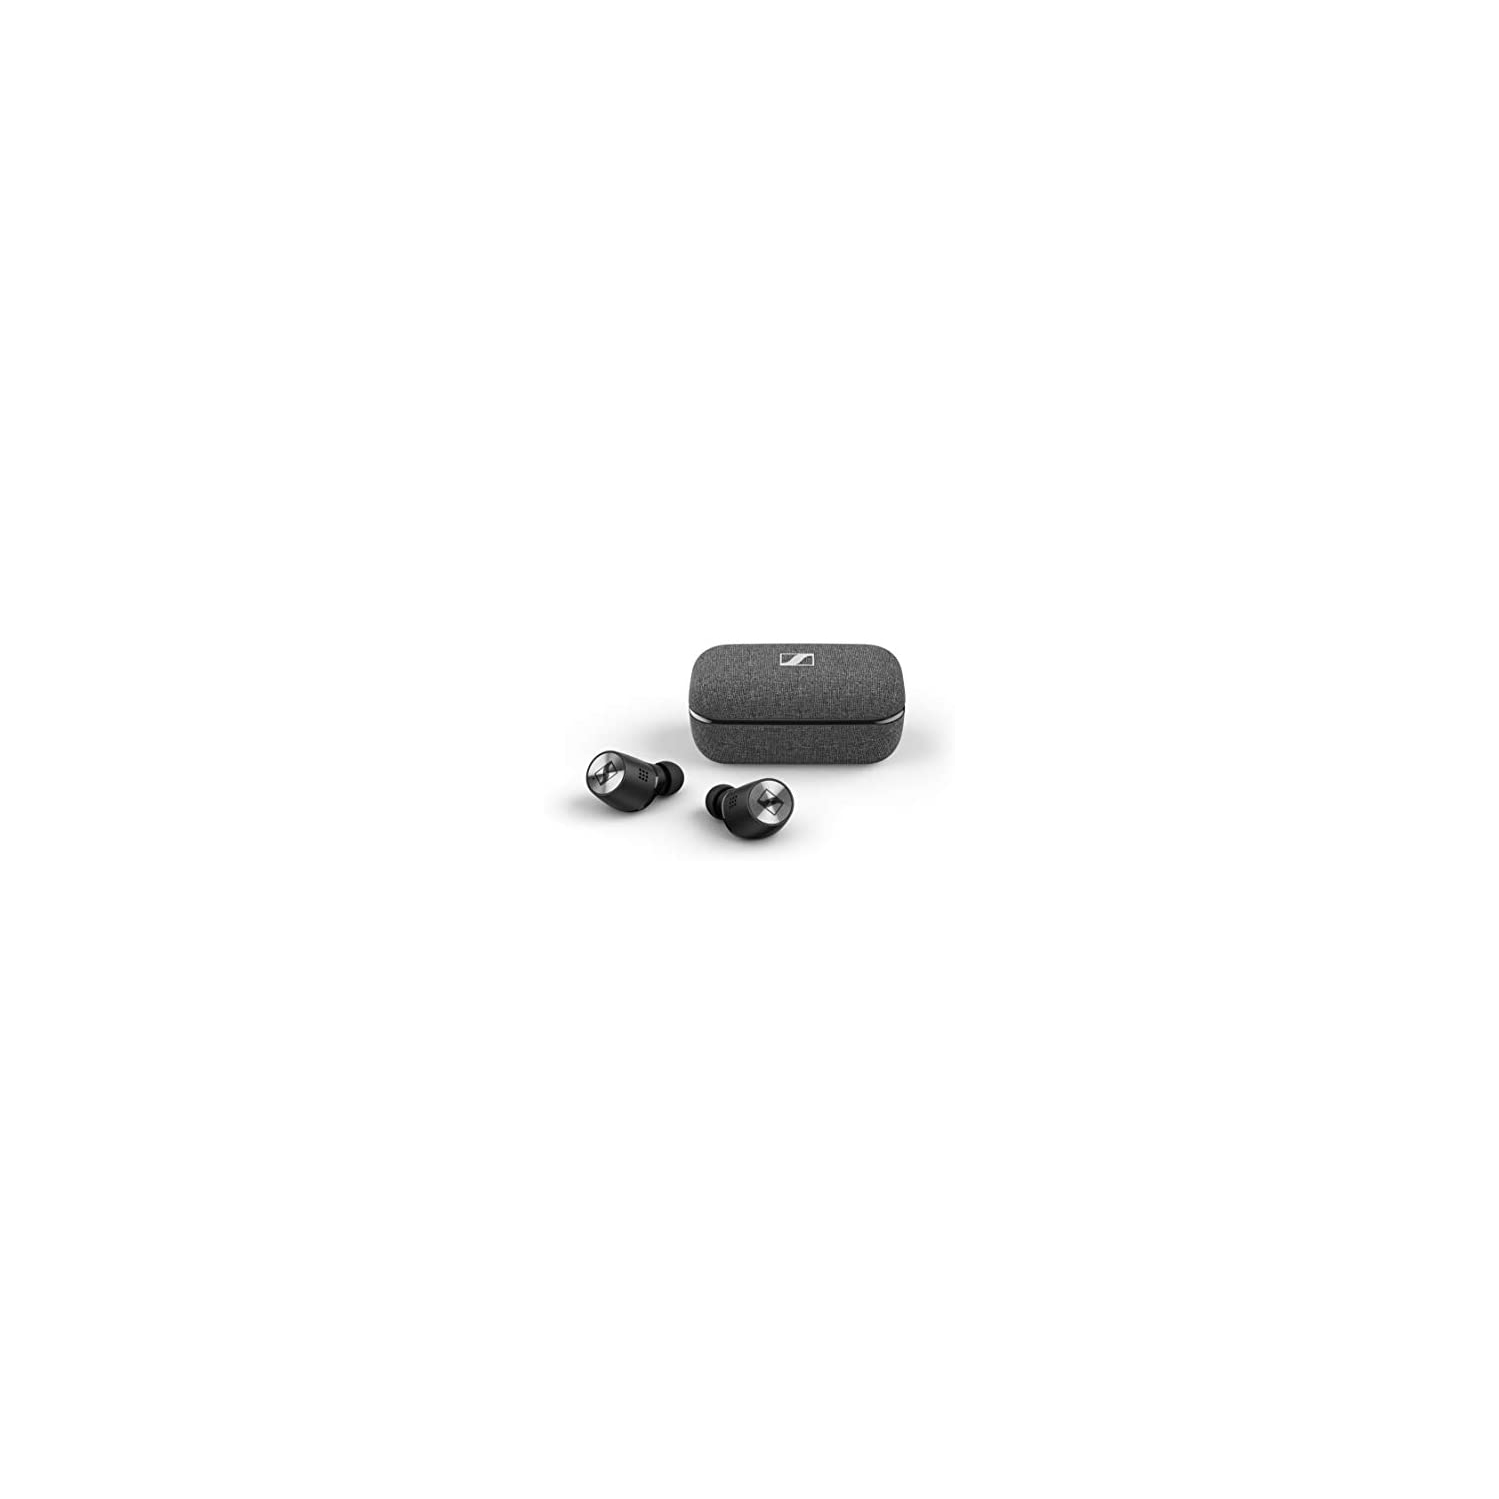 Sennheiser Momentum True Wireless 2 - Bluetooth earbuds with active noise cancellation, smart pause, customizable touch